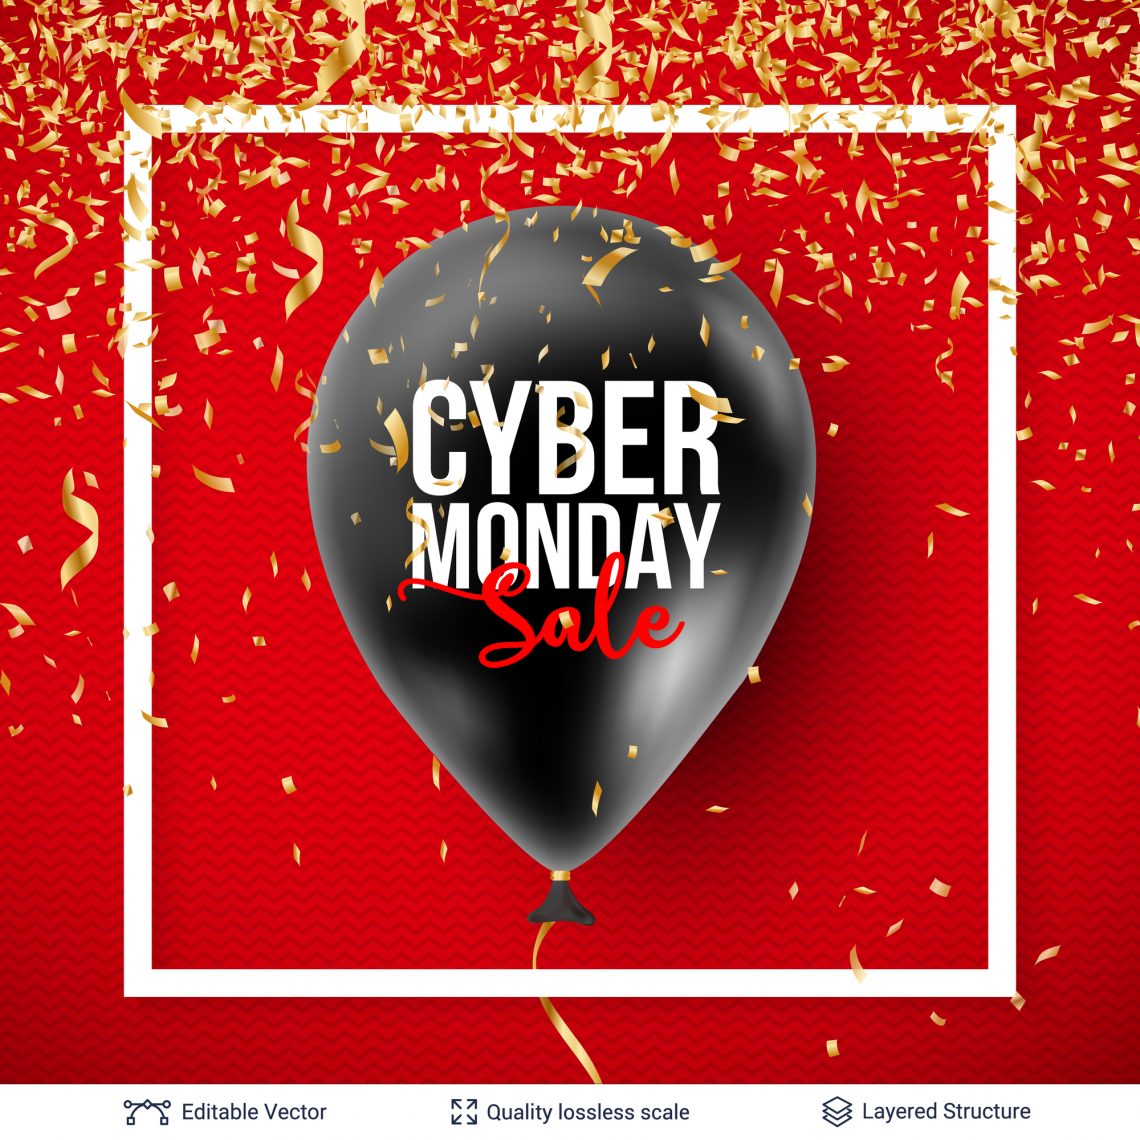 Cyber Monday Sale Background with balloons.